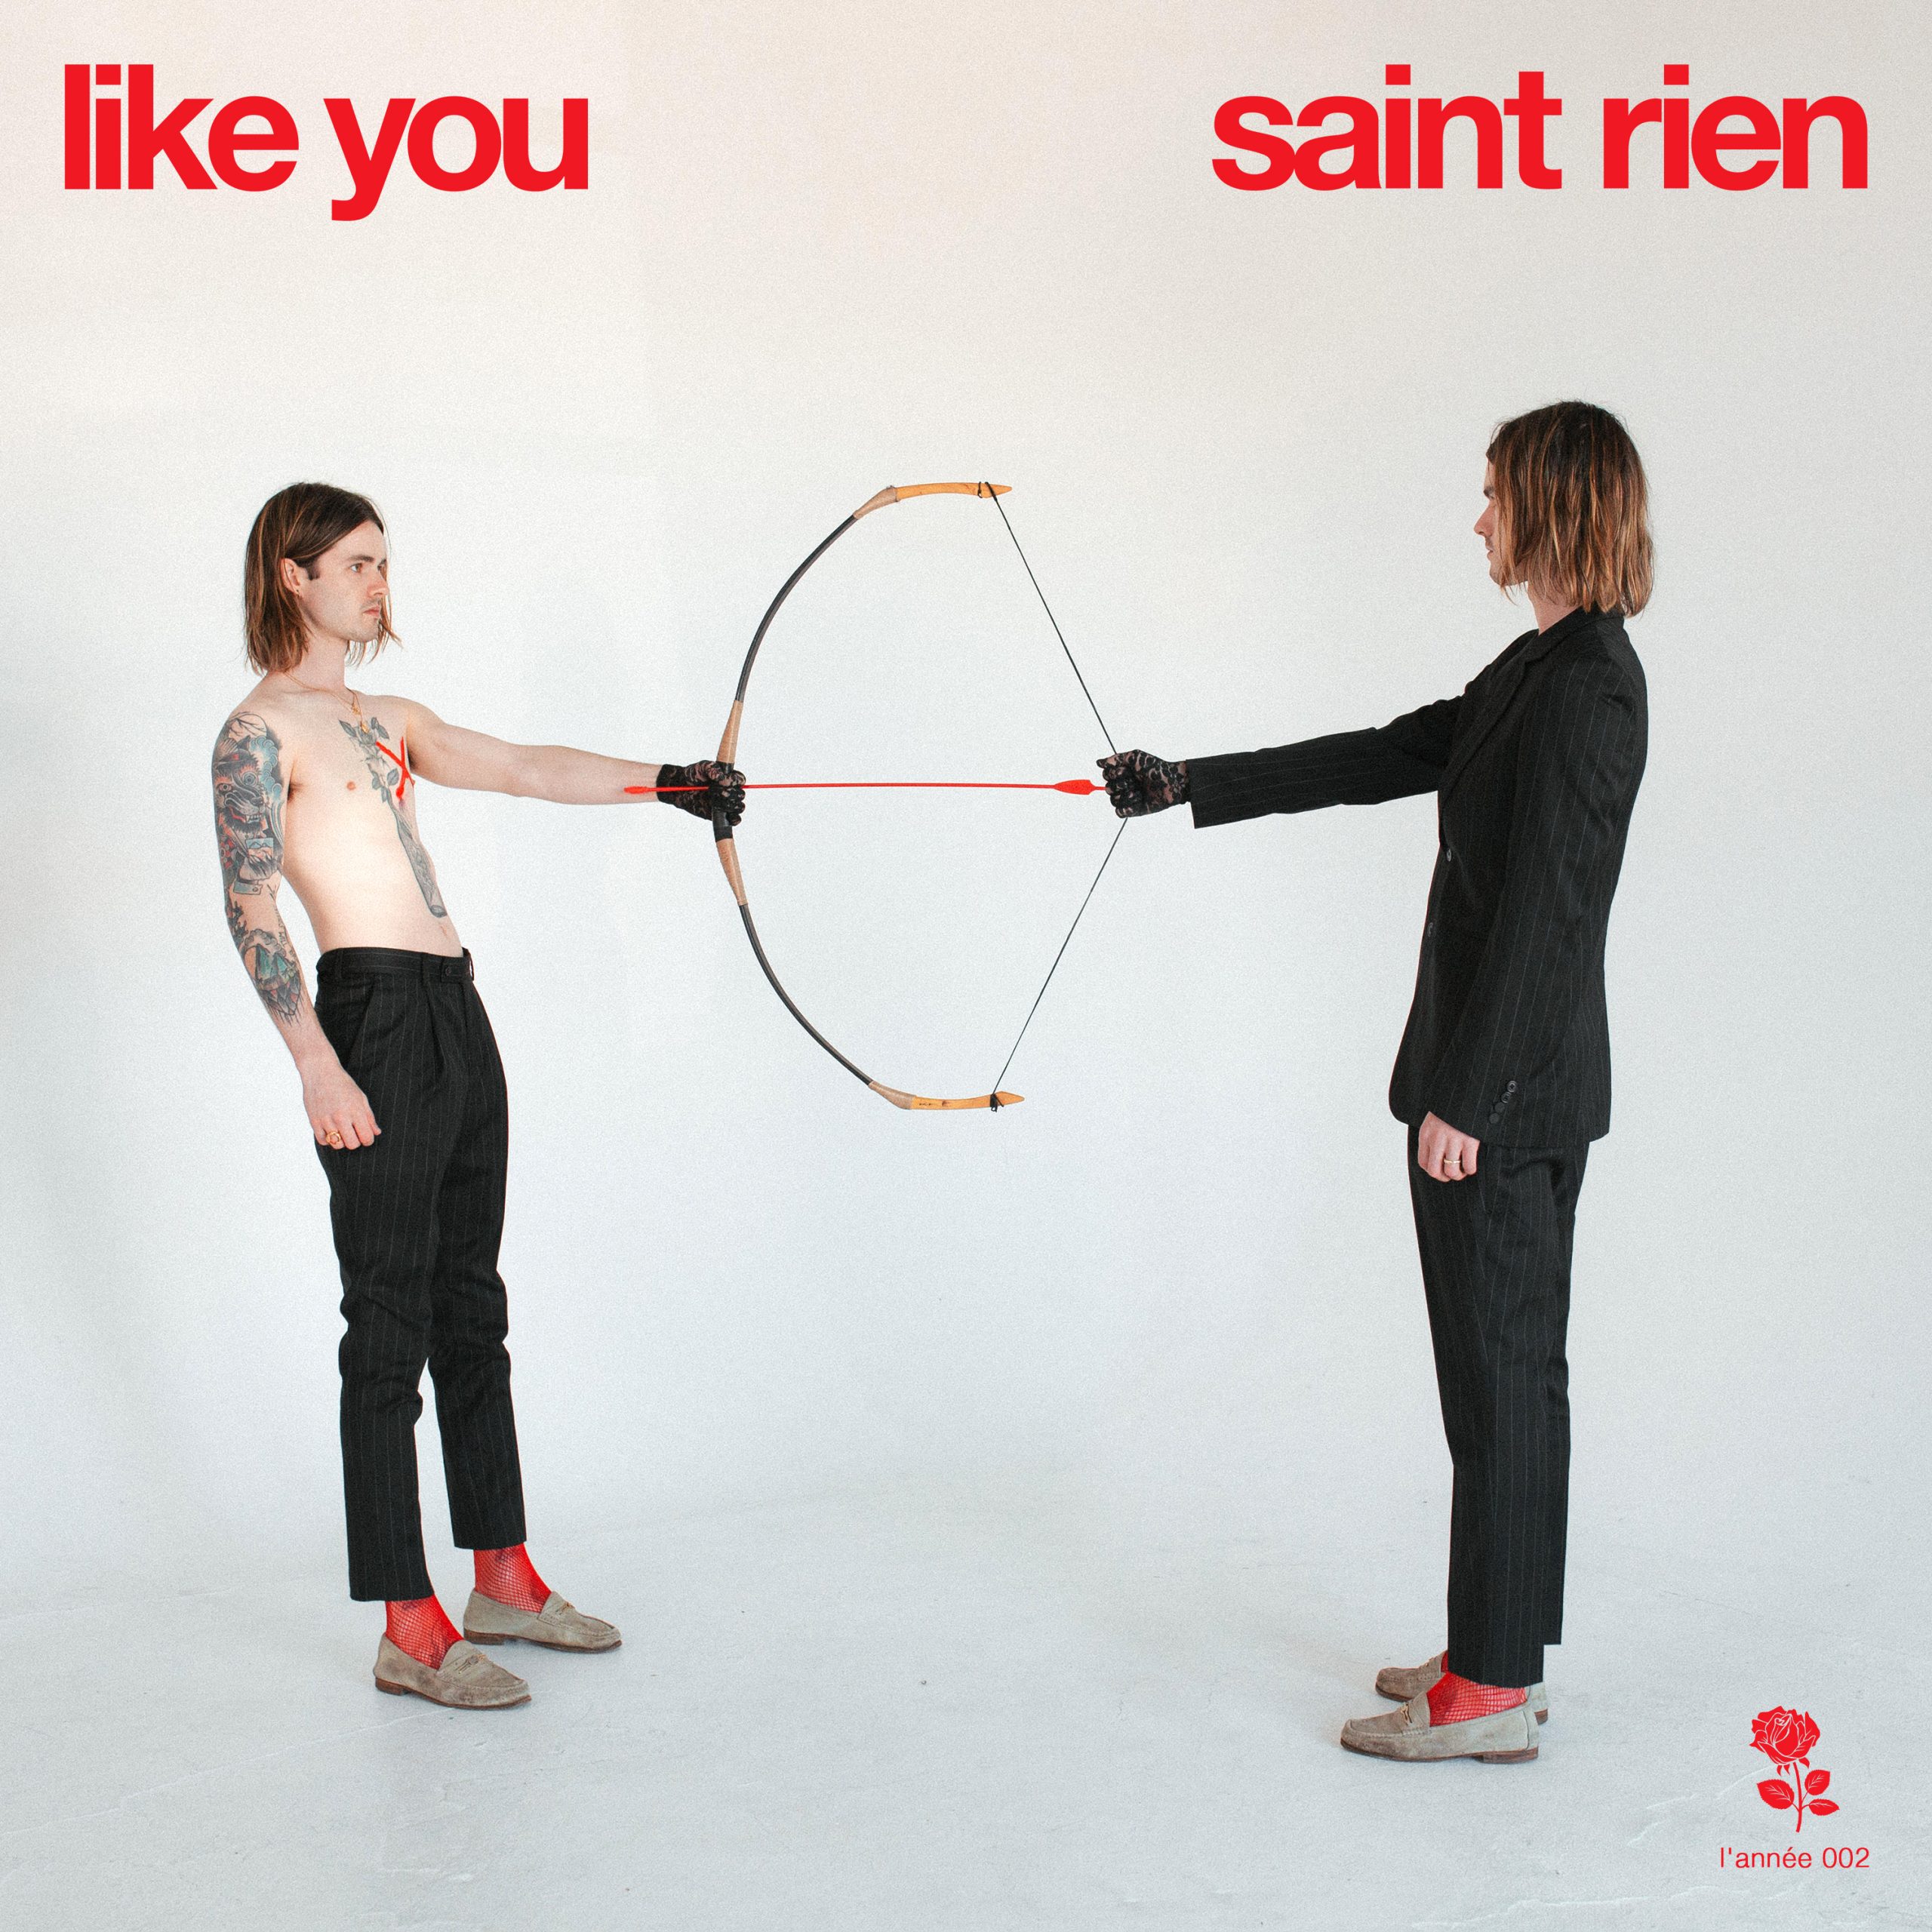 Saint Rien: A New Voice For A Prevailing Topic!